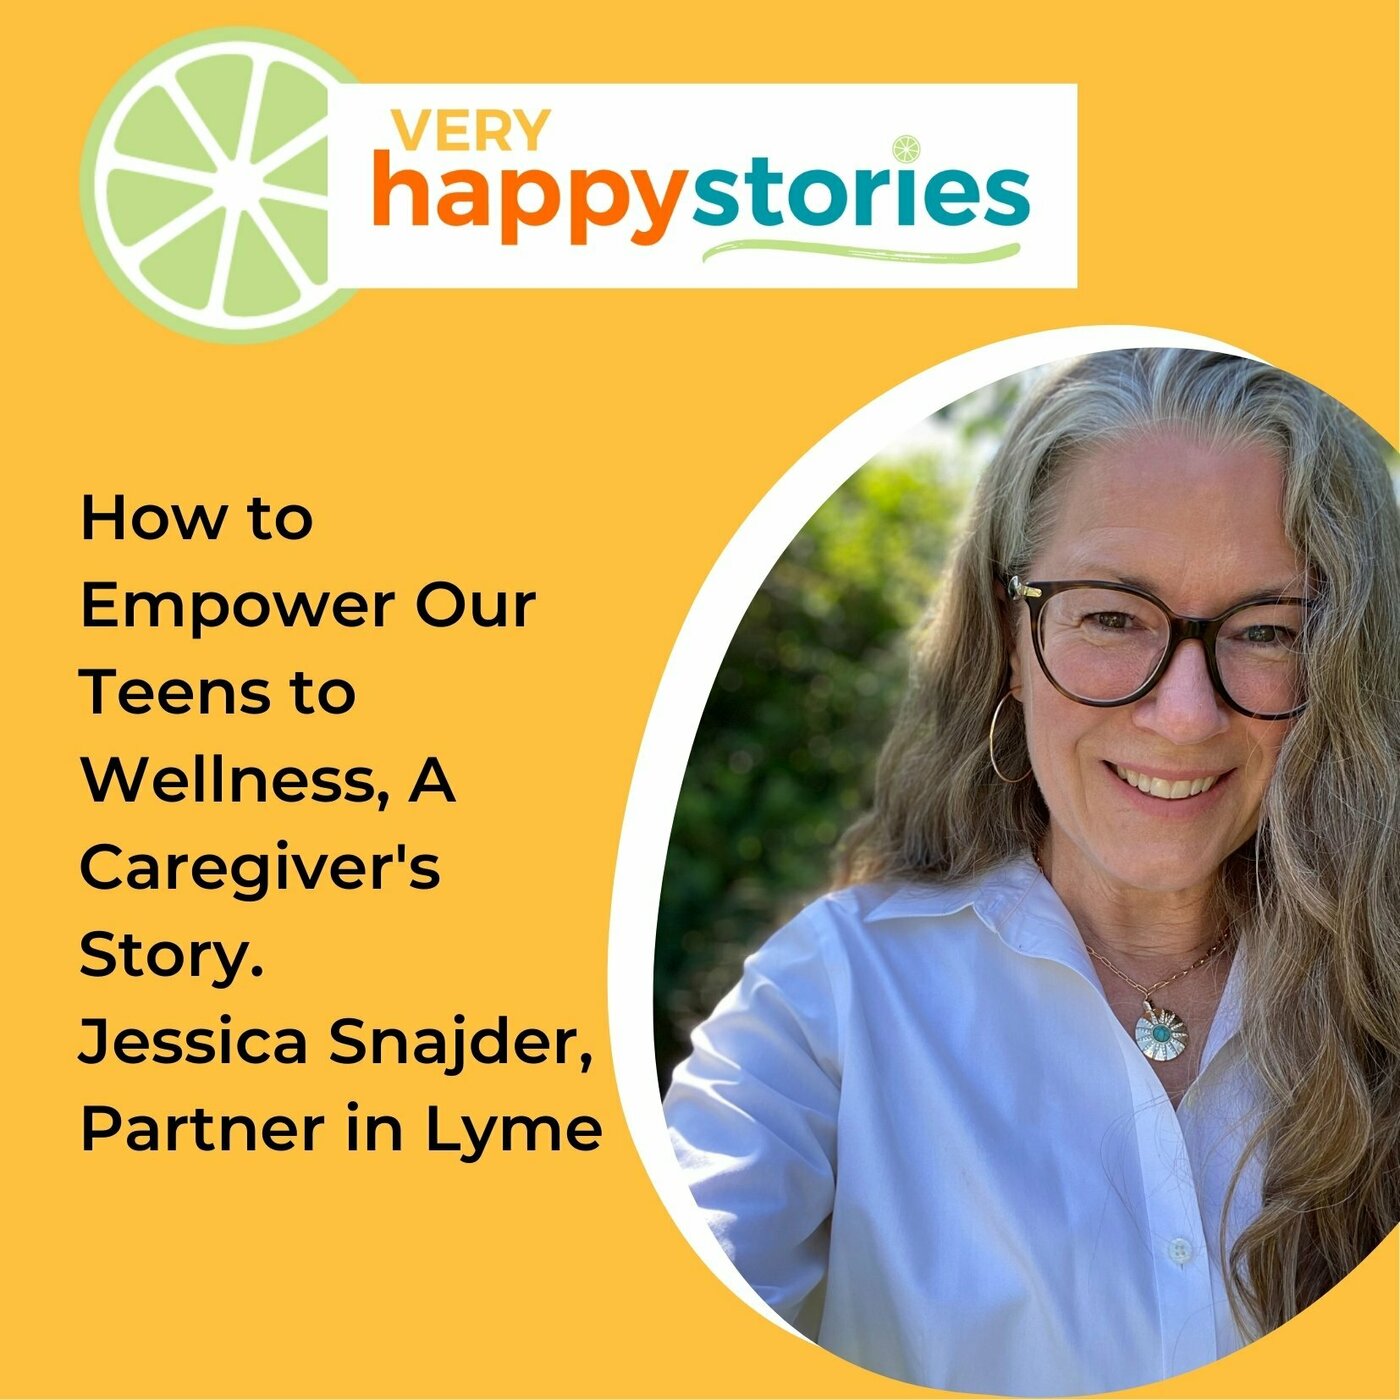 63: How to Empower Our Teens to Wellness, A Caregiver's Story with Jessica Snajder of Partner in Lyme